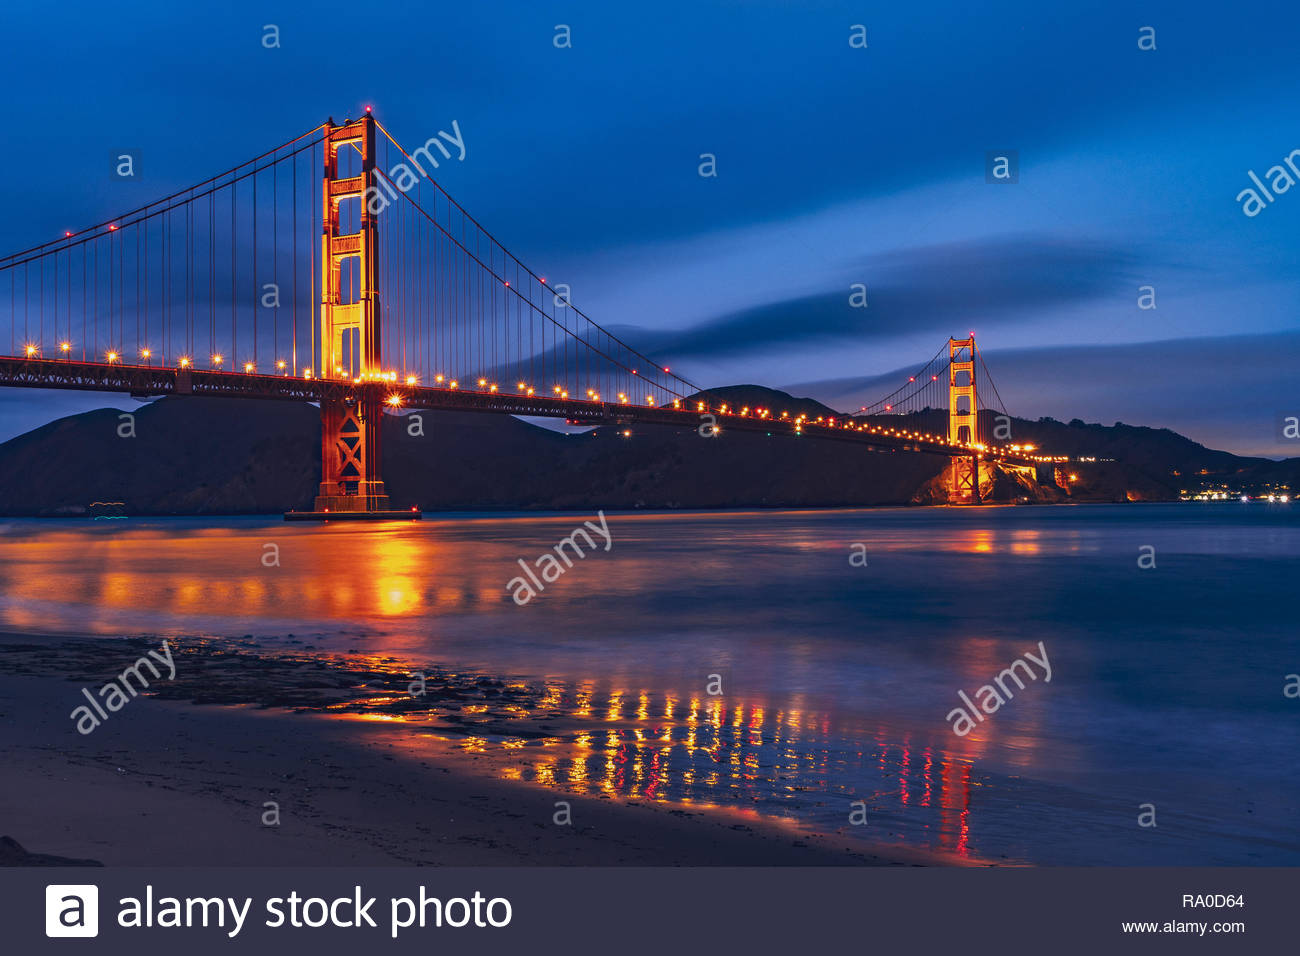 Nighttime view of Golden Gate Bridge reflected in the blurred